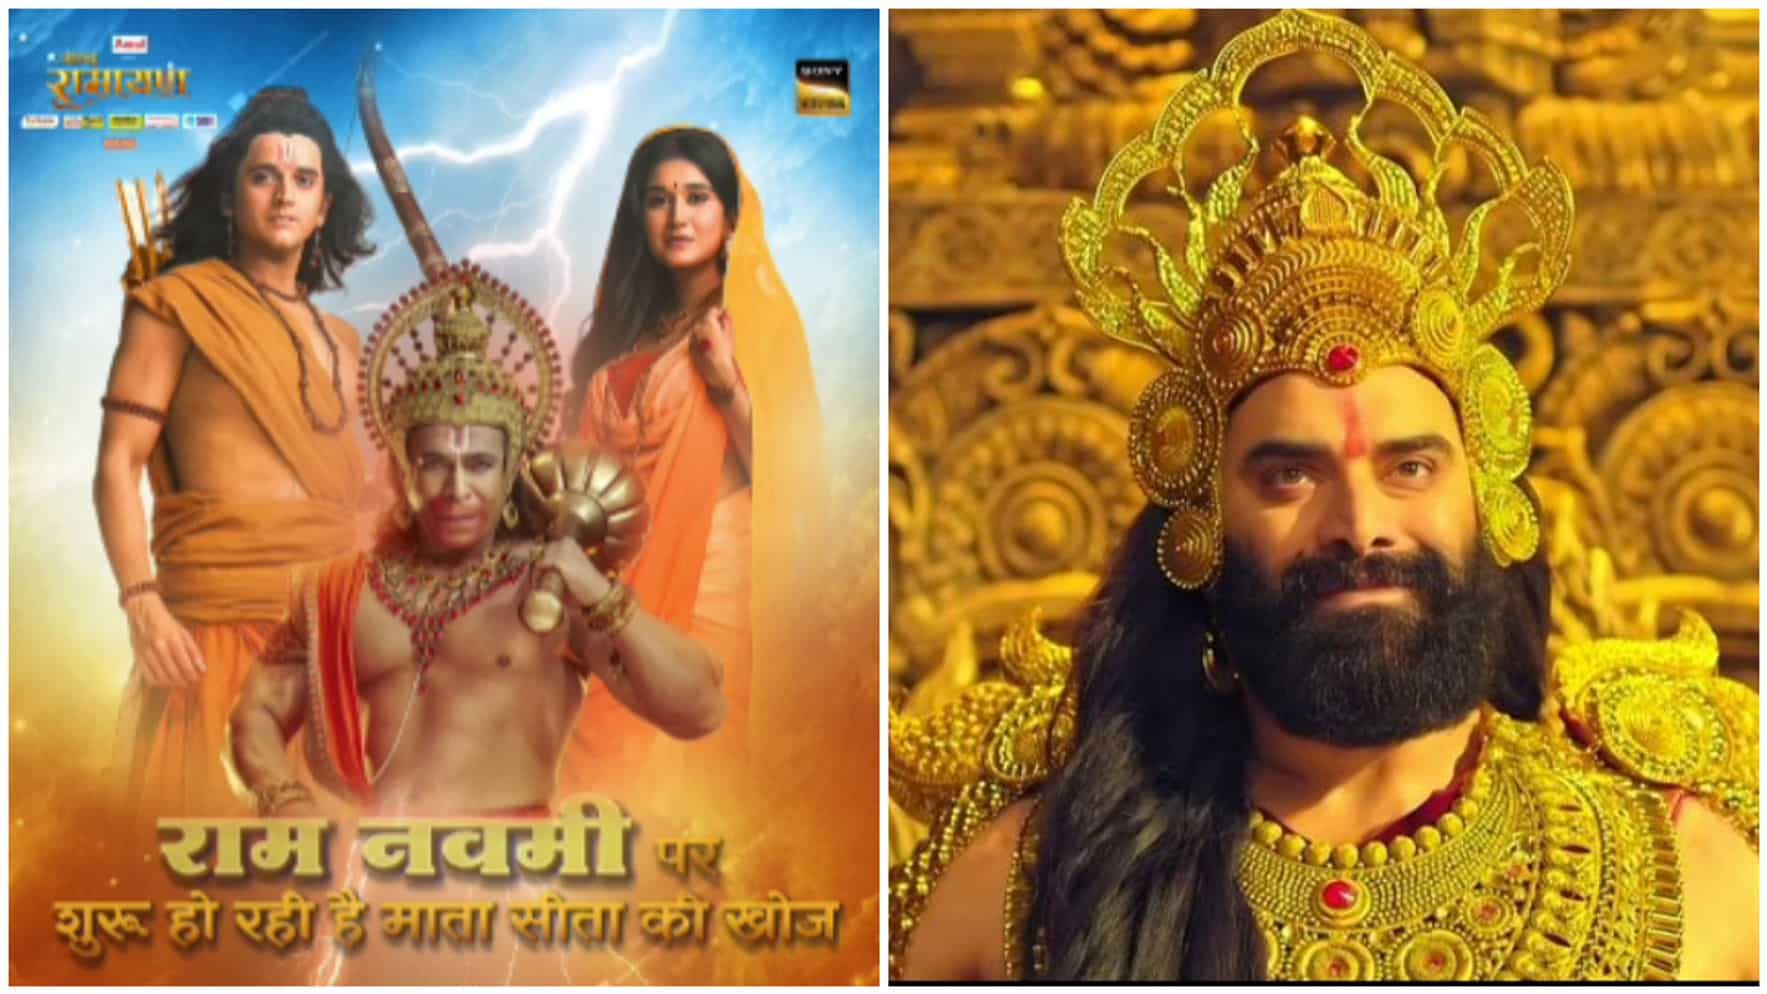 Shrimad Ramayan - Sony LIV to air 1-hour special episode on Ram Navami; details inside